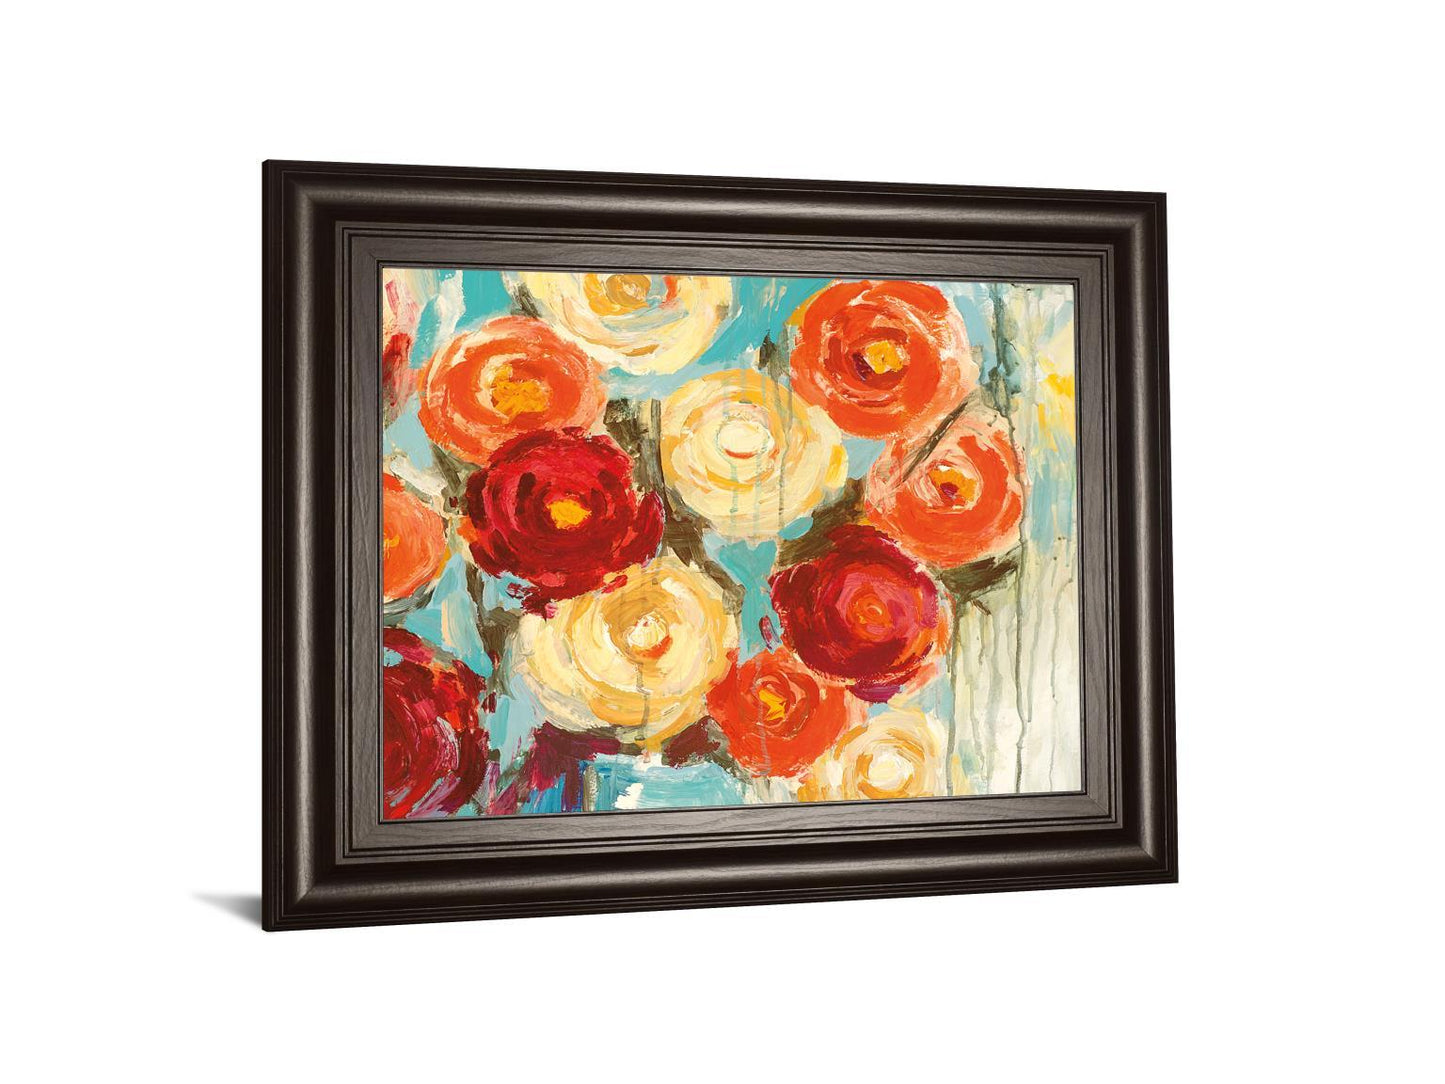 Sunlit Blooms By Pasion - Framed Print Wall Art - Red